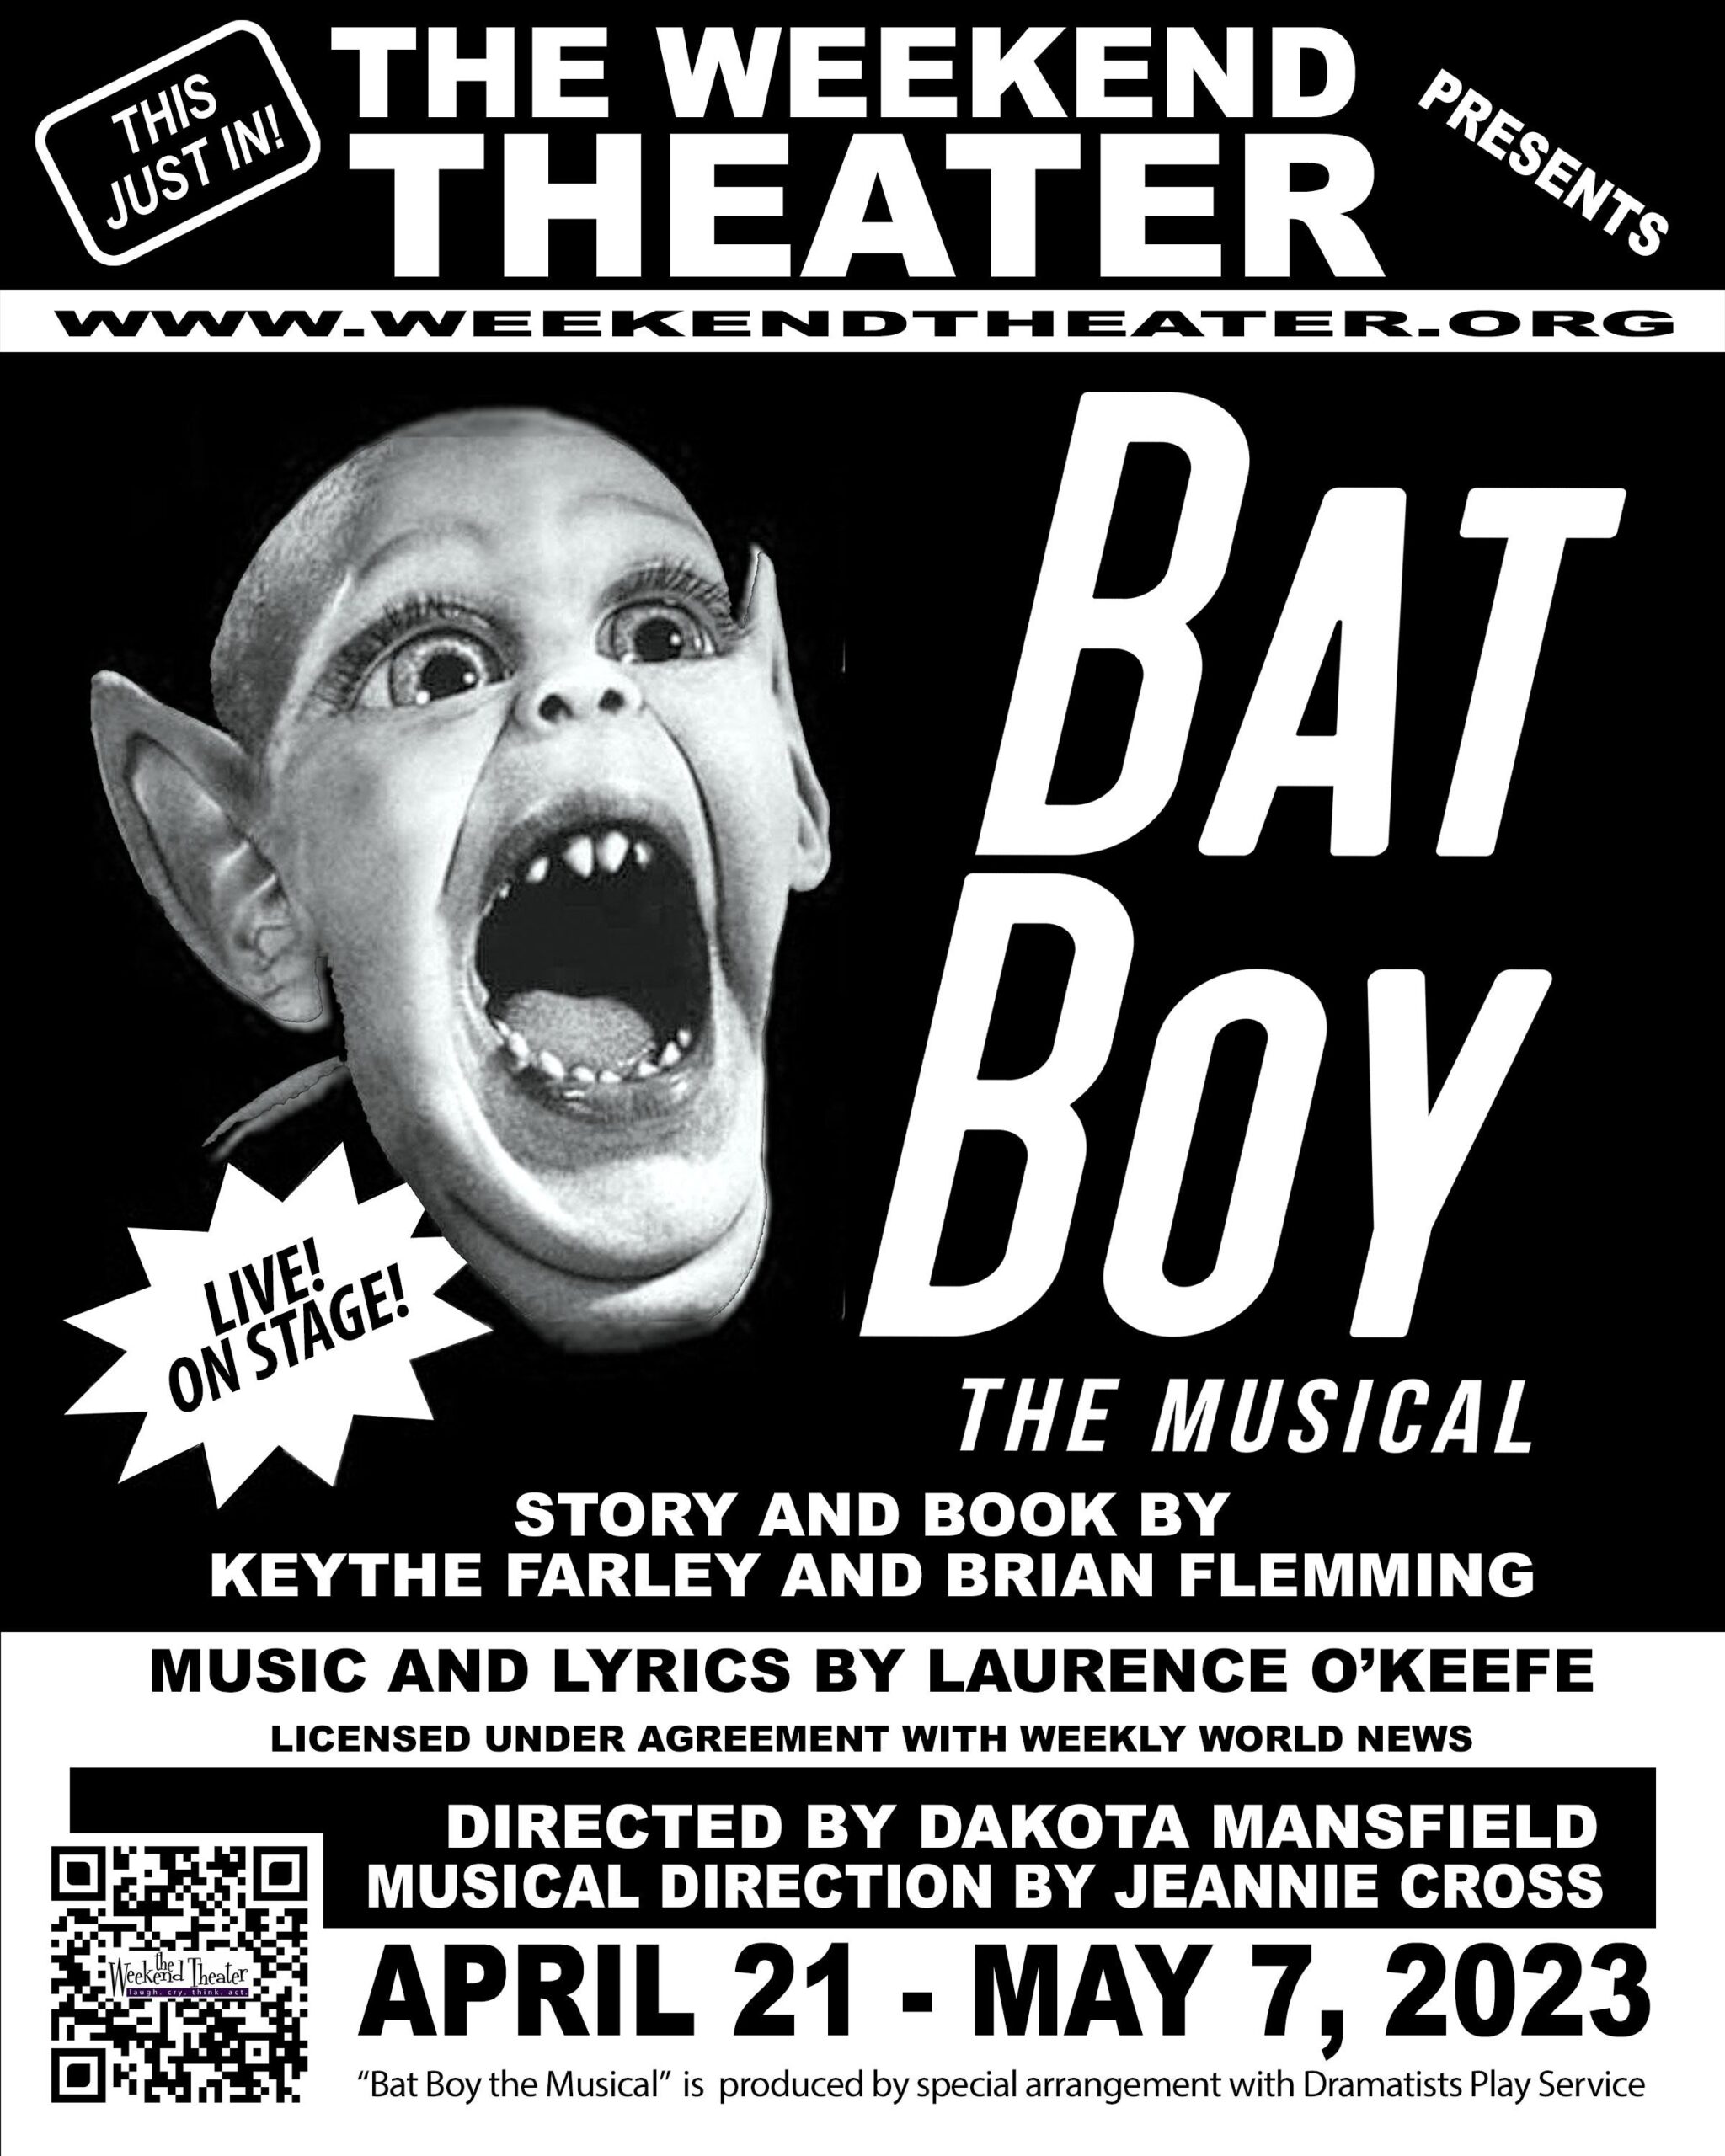 CAST ANNOUNCEMENT FOR BATBOY! THE MUSICAL